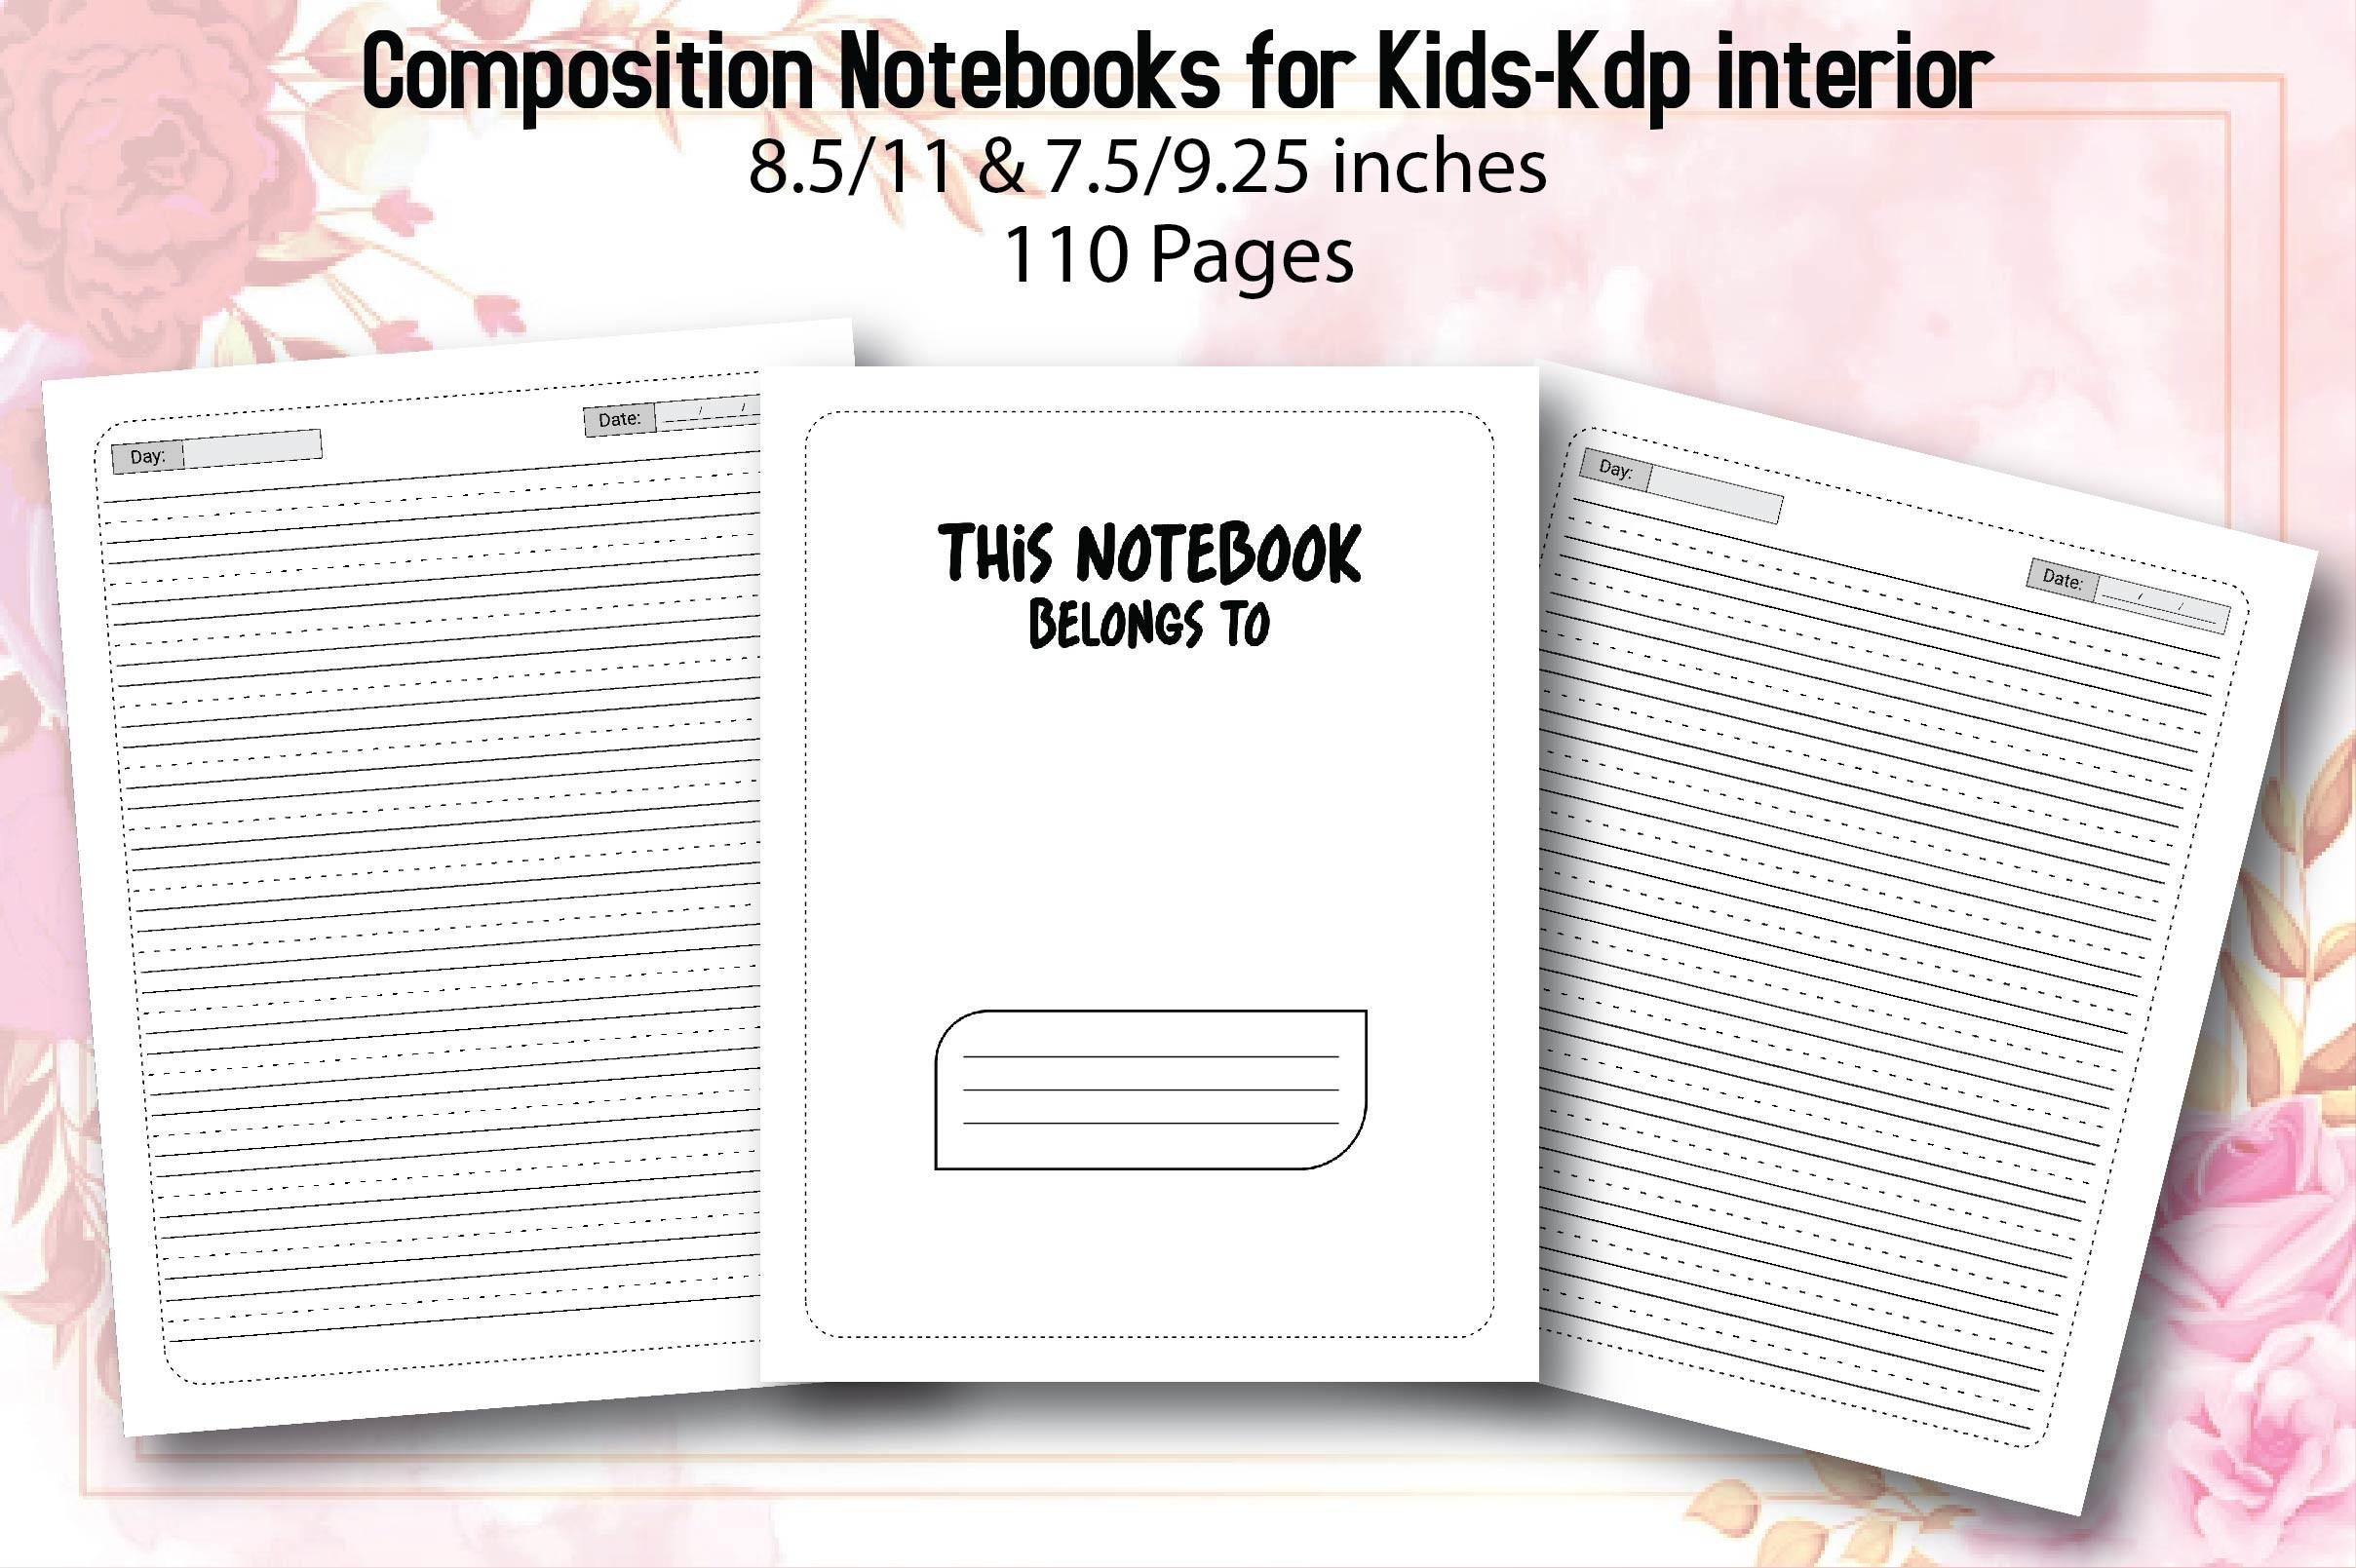 Composition Notebooks for Kids-Vol 2